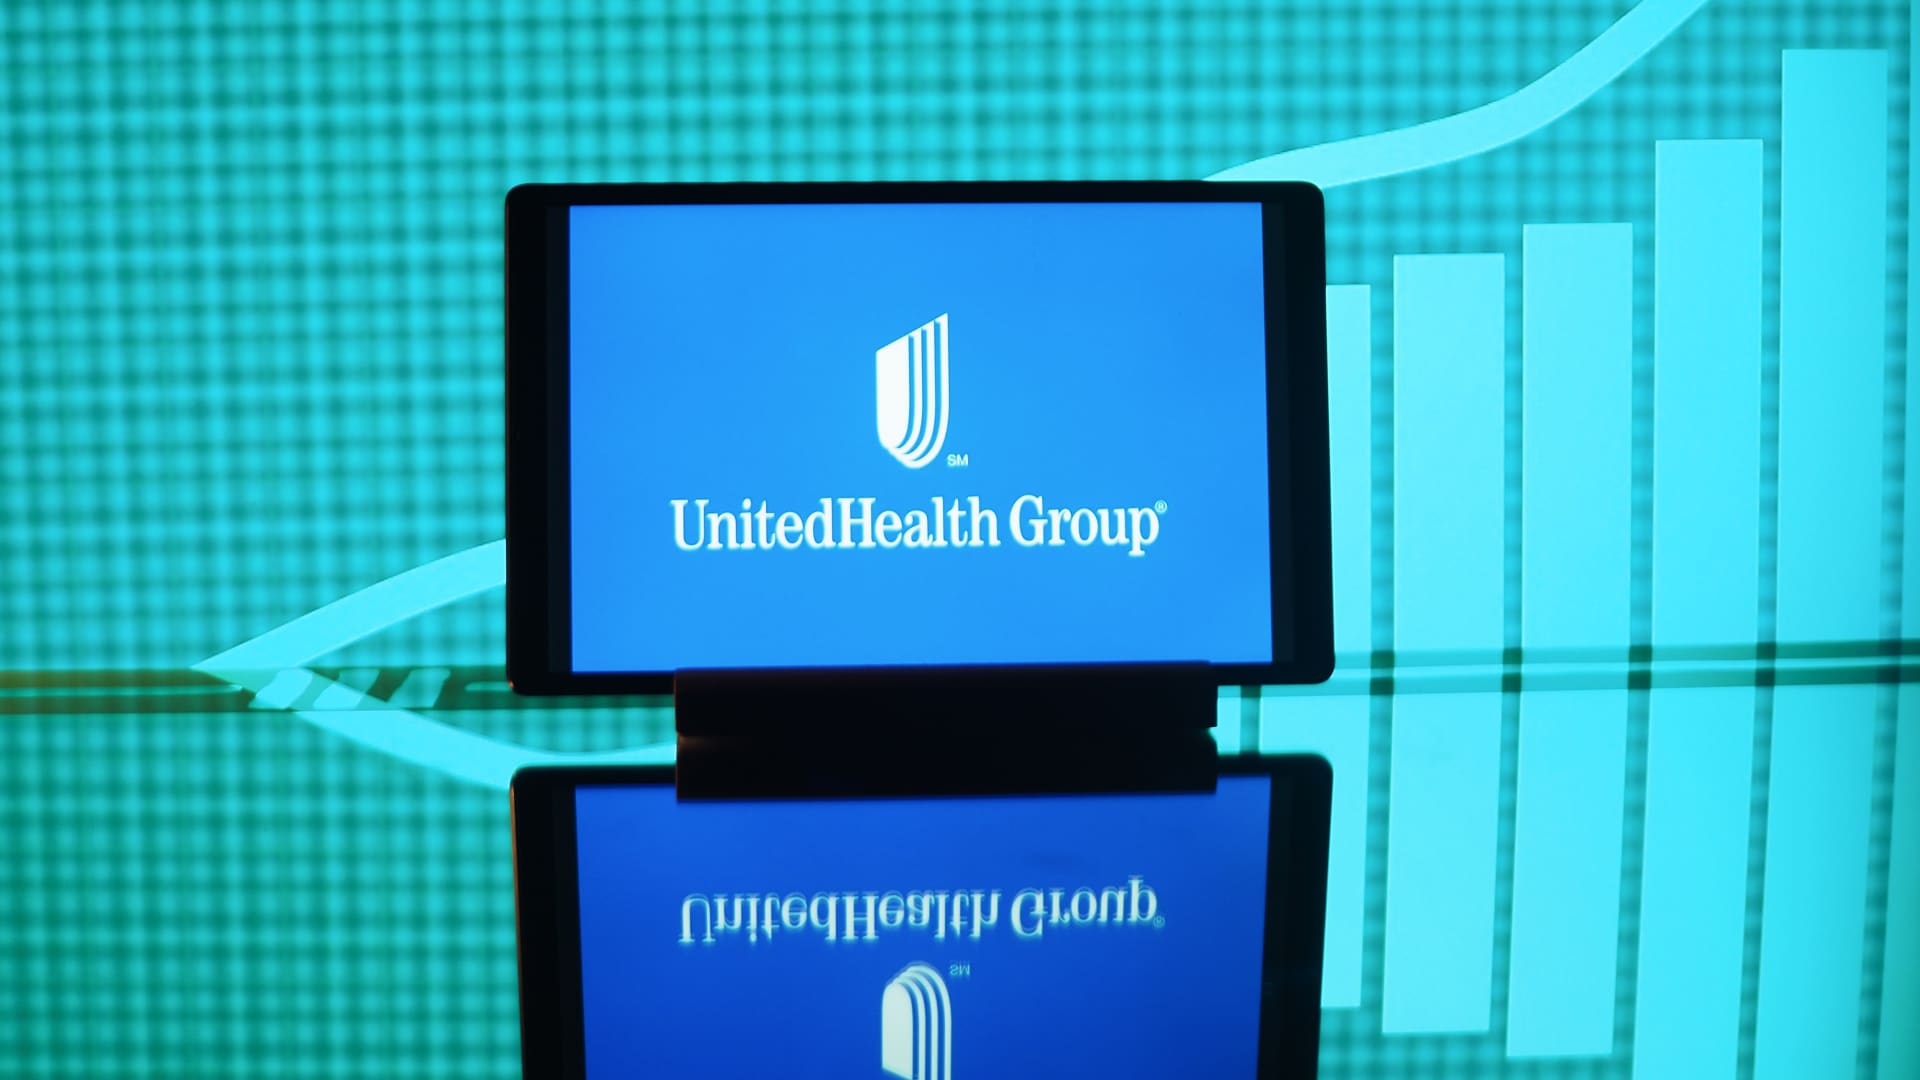 UnitedHealth beats on income in spite of effects from cyberattack